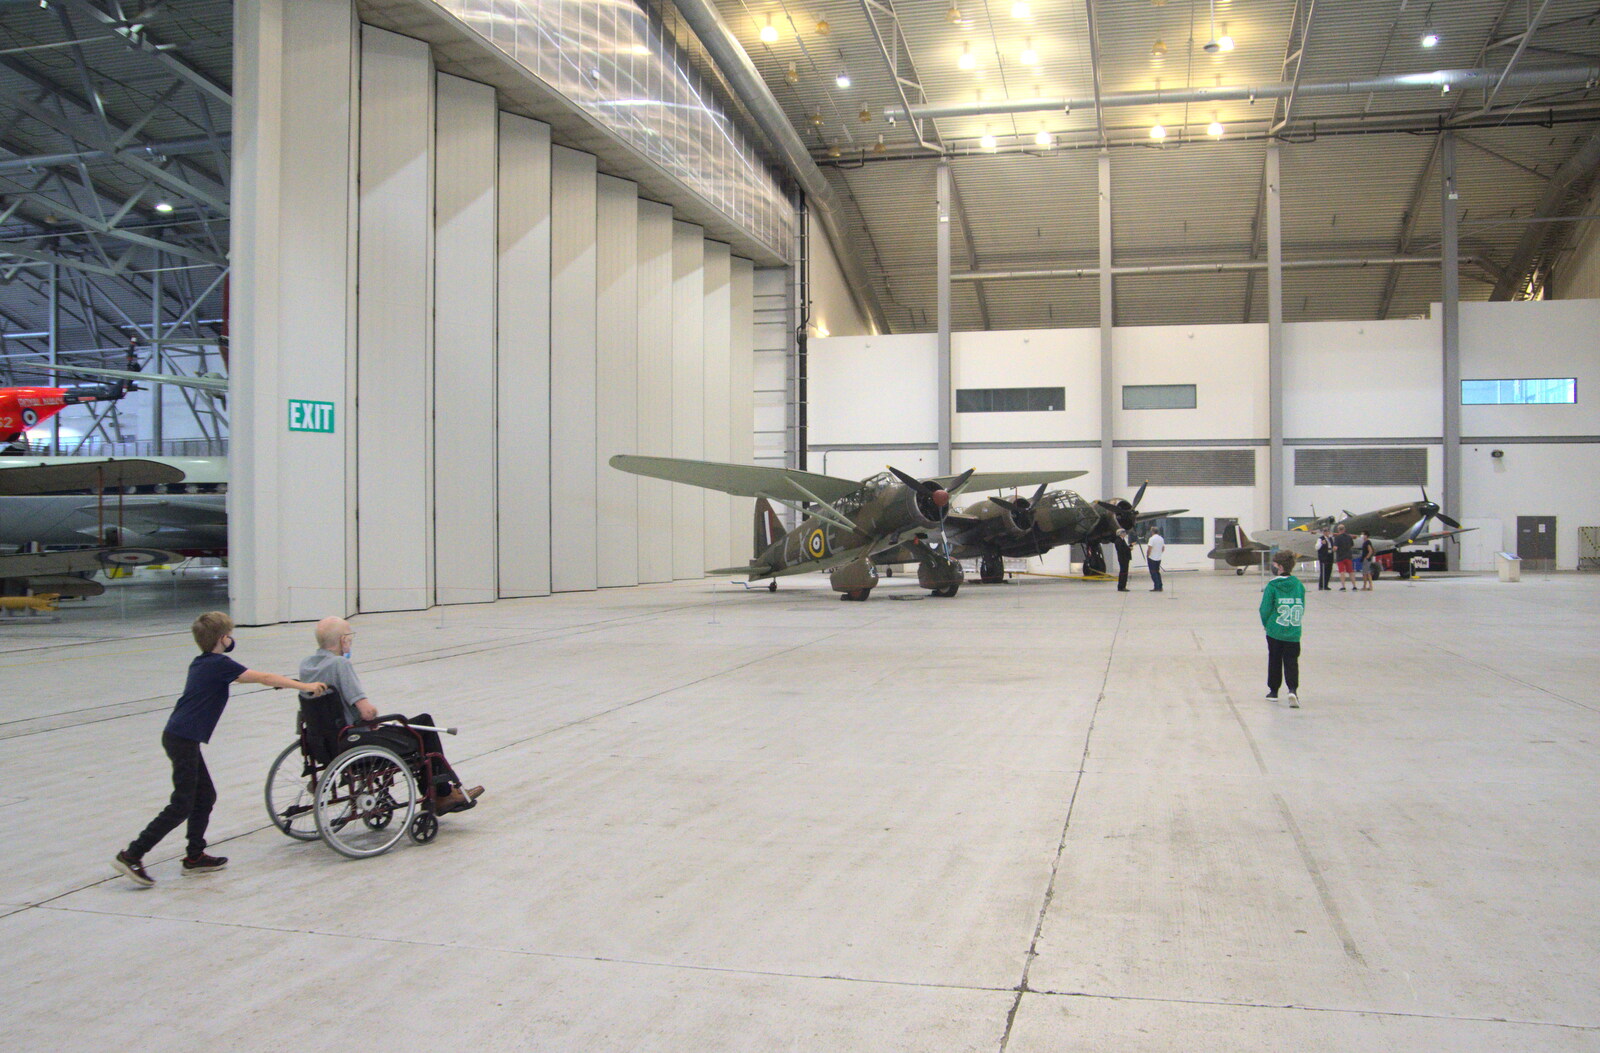 Harry pushes the G-Unit around from The Duxford Dash, IWM Duxford, Cambridge - 13th September 2020